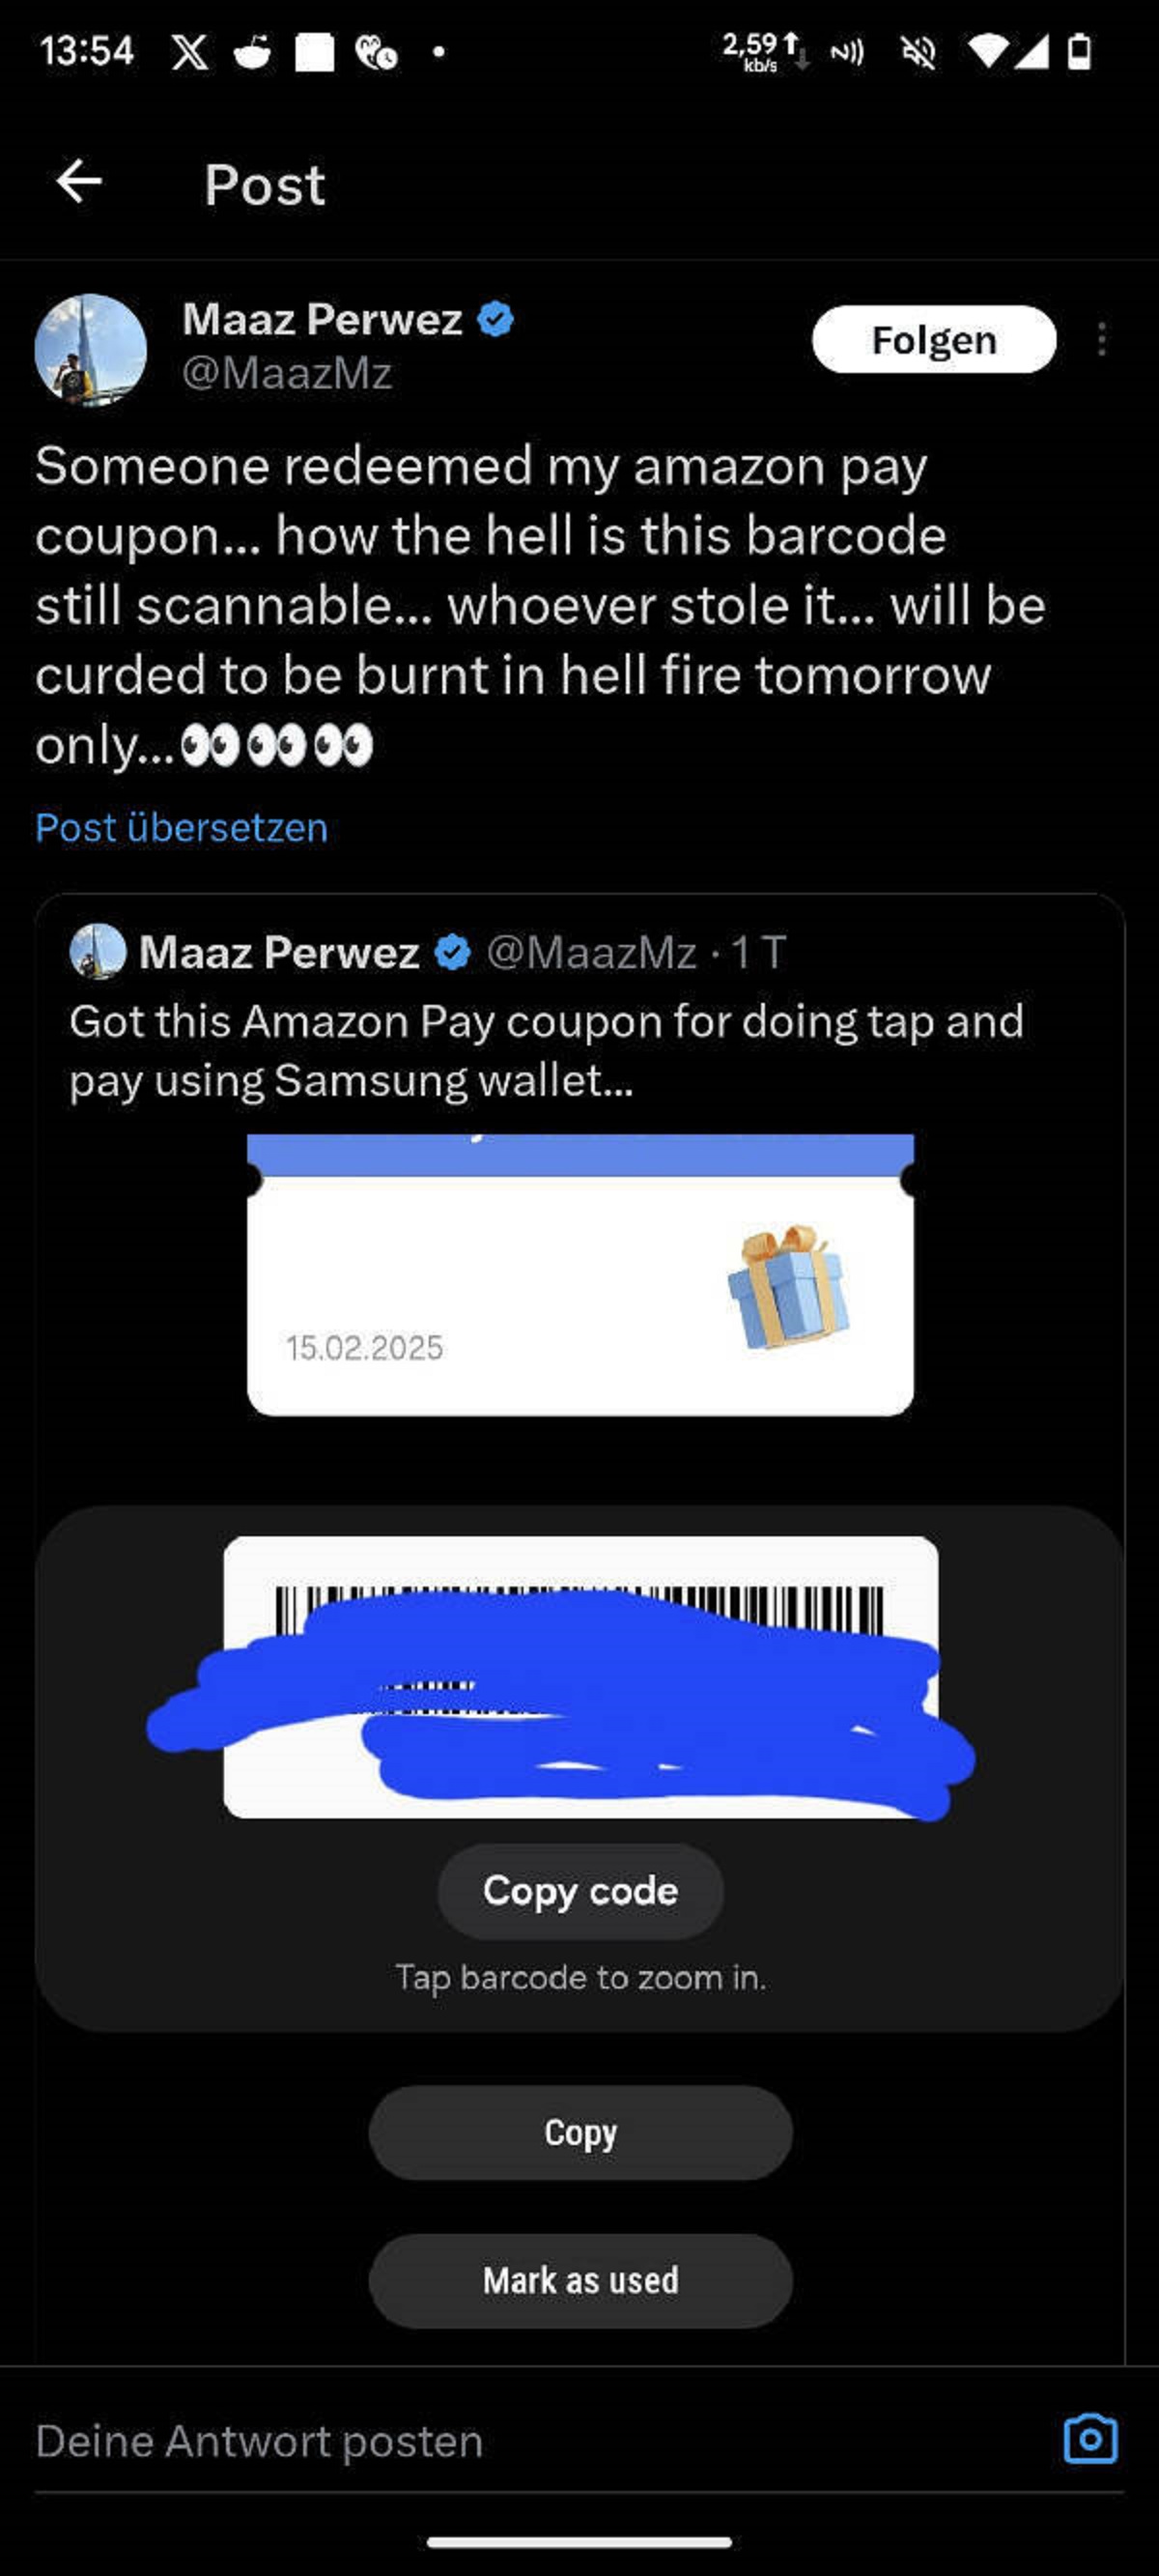 screenshot - X Post 2,591 kbs N Maaz Perwez Folgen Someone redeemed my amazon pay coupon... how the hell is this barcode still scannable... whoever stole it... will be curded to be burnt in hell fire tomorrow only...000000 Post bersetzen Maaz Perwez . 1T 